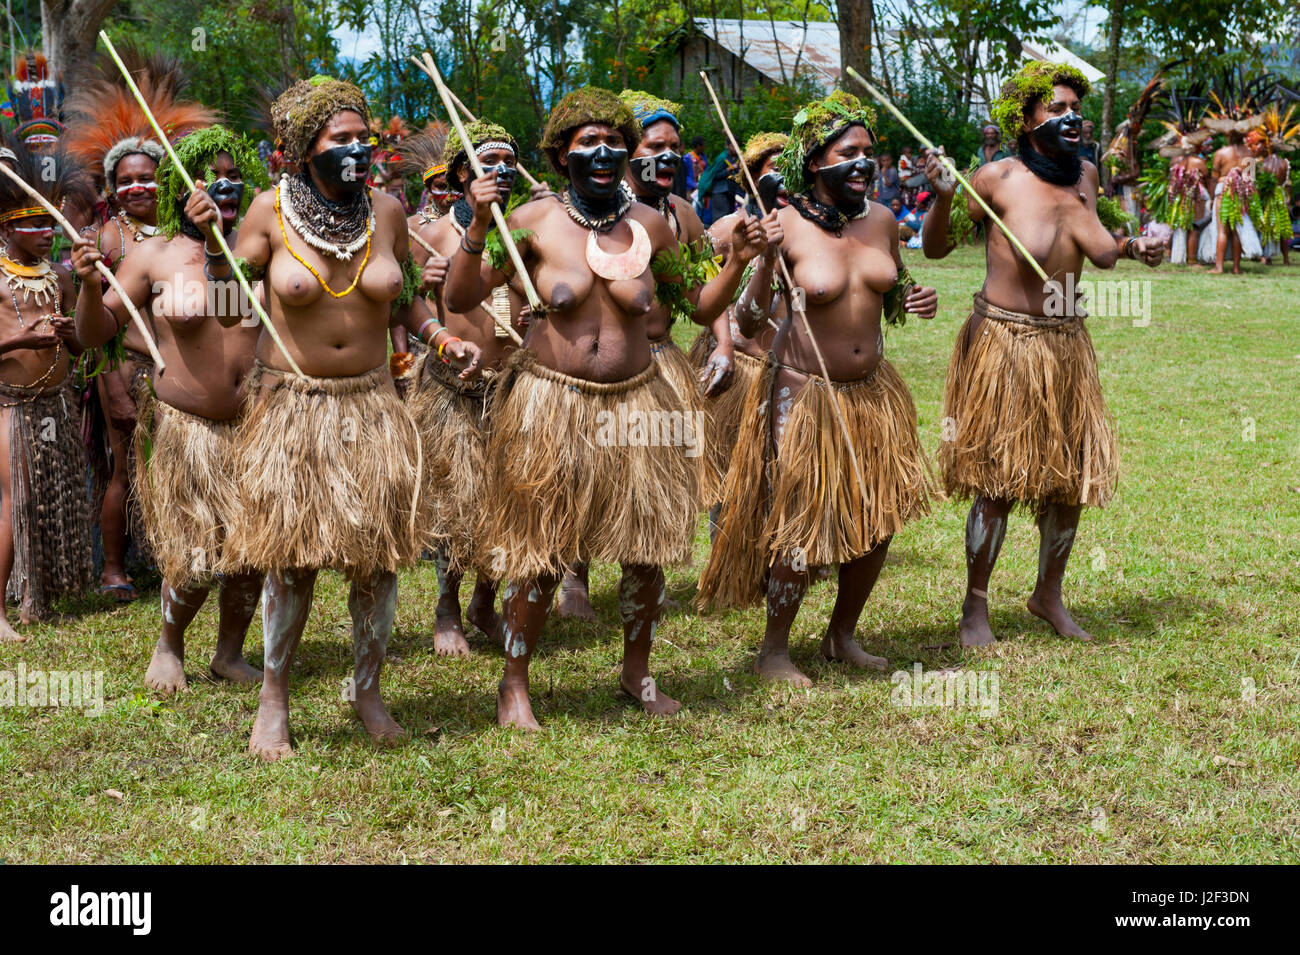 Colorful dress and face painted local tribes celebrating the traditional Sing Sing in Paya in the Highlands of Papua New Guinea, Melanesia Stock Photo